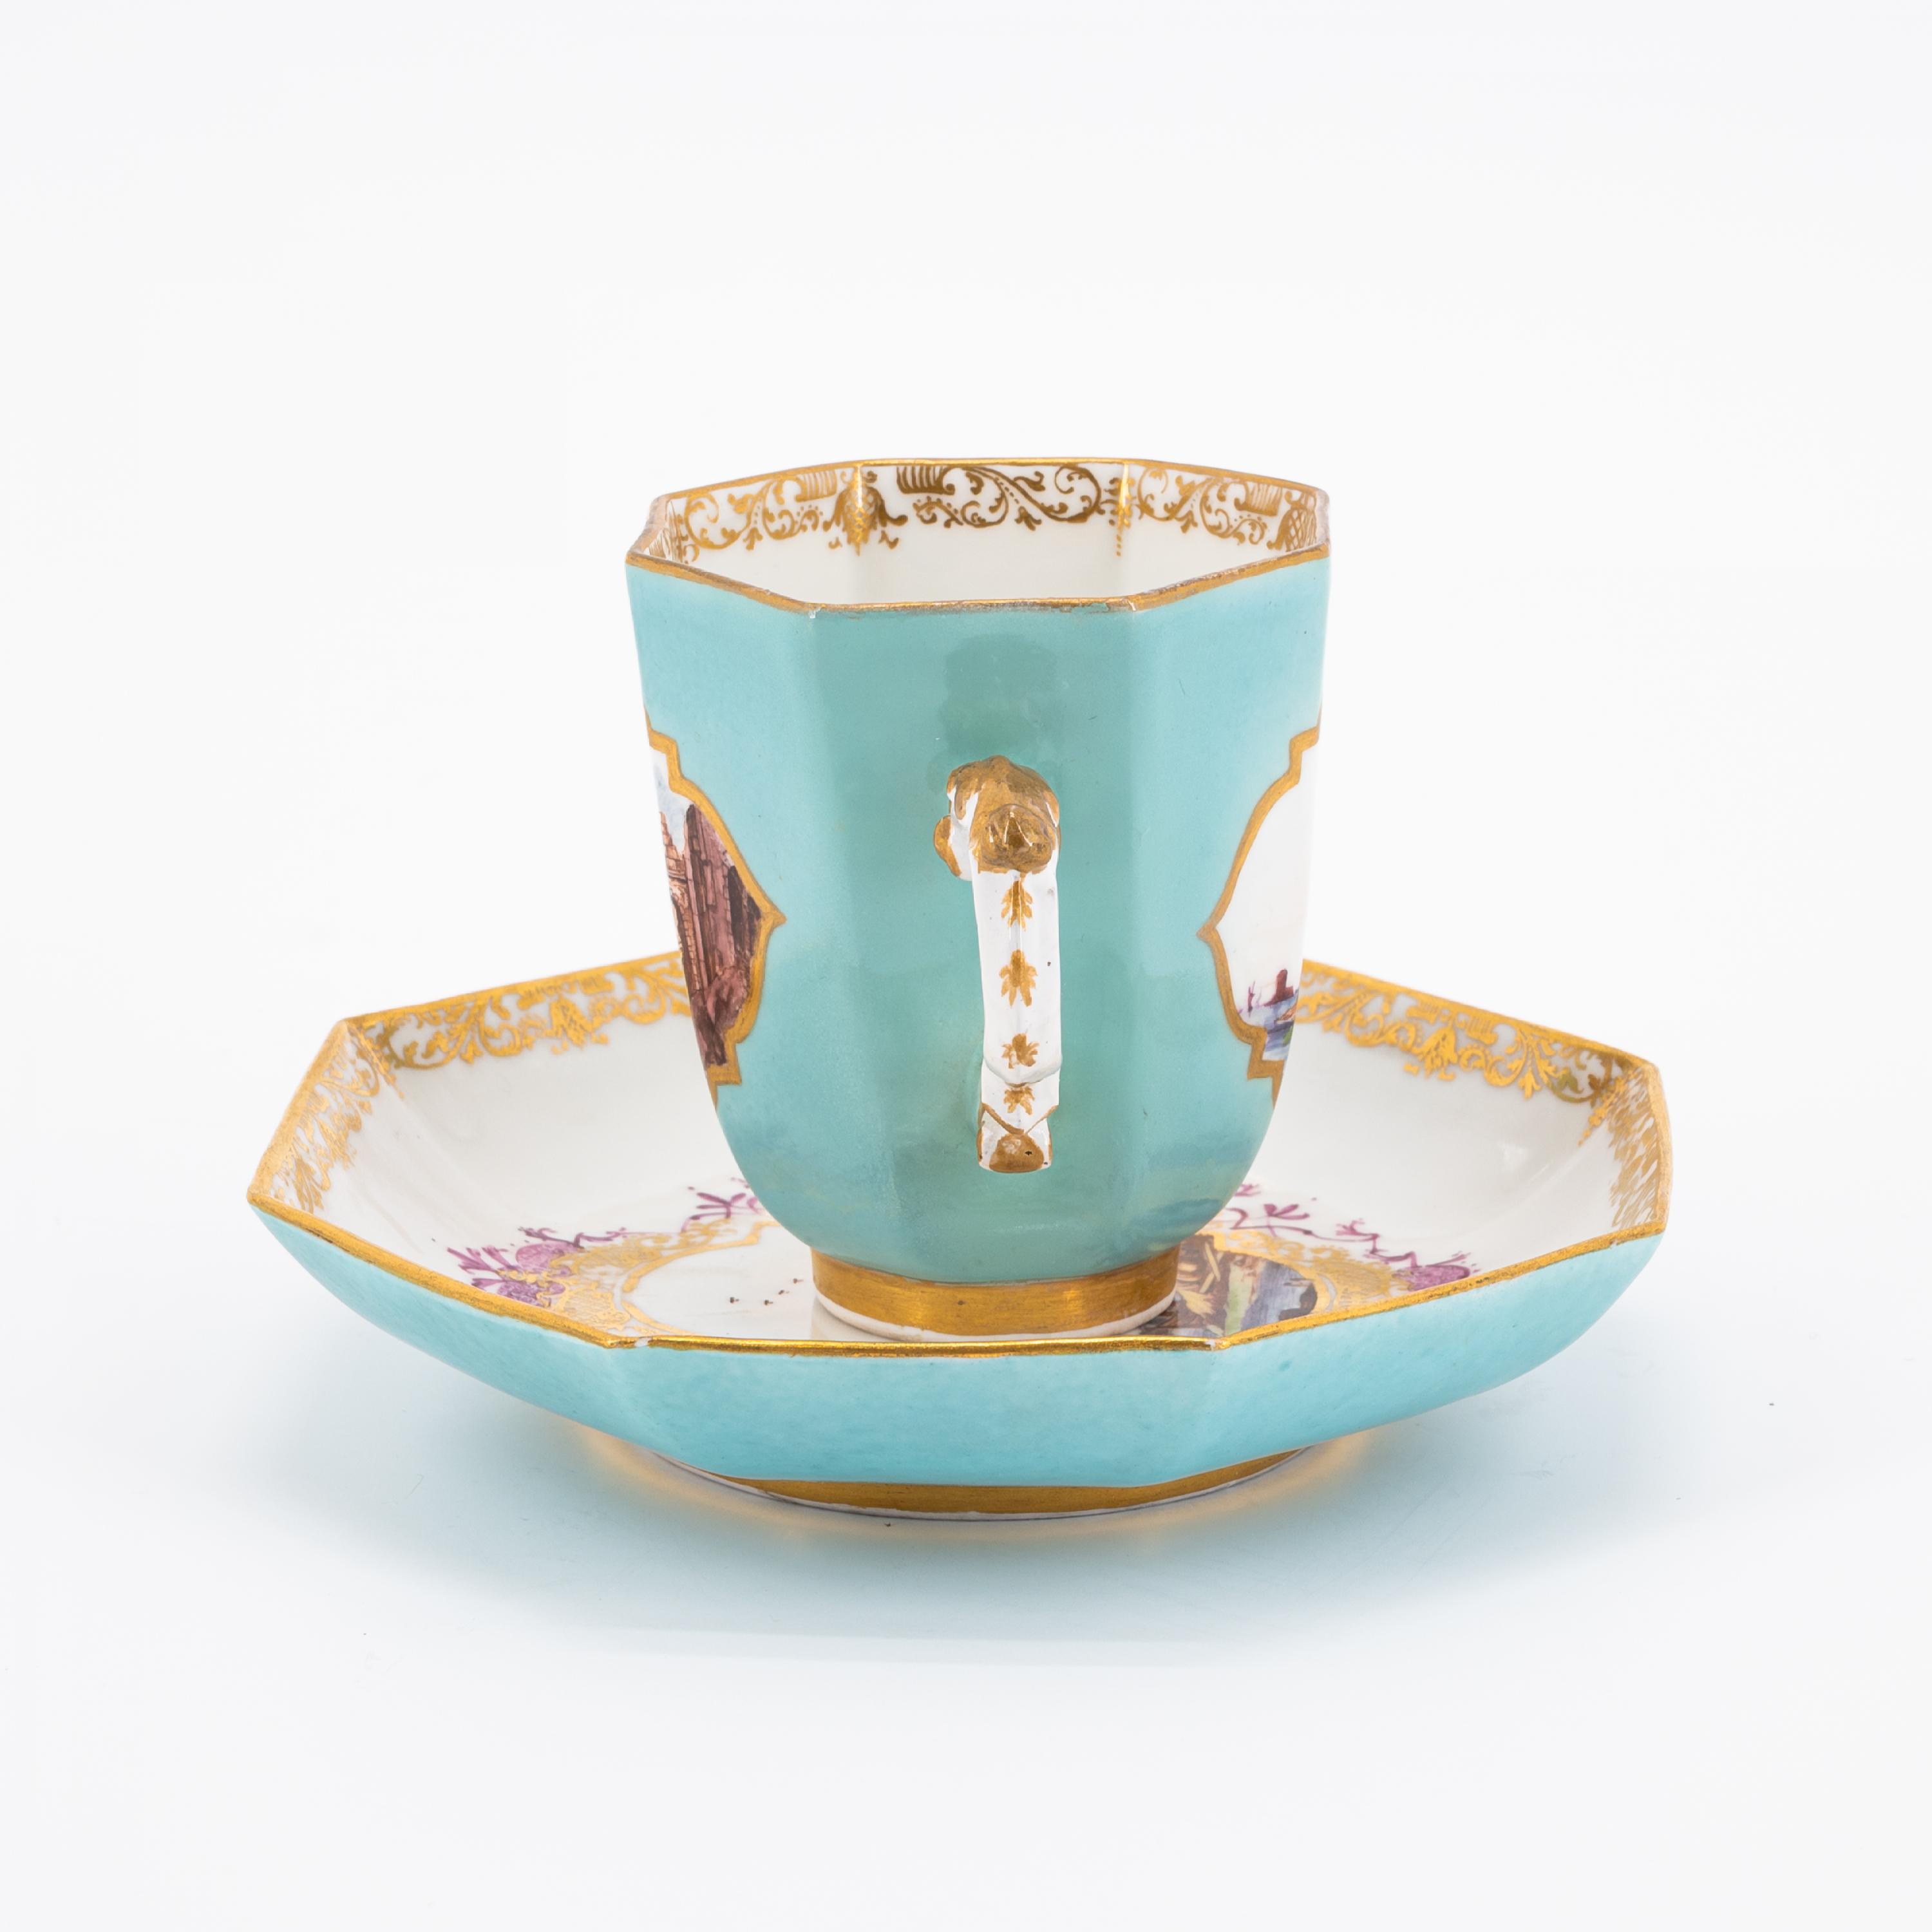 OCTAGONAL PORCELAIN CREAM JUG; HANDLES CUP AND SAUCER WITH TURQUOISE BACKGROUND AND LANDSCAPE DECORA - Image 4 of 11